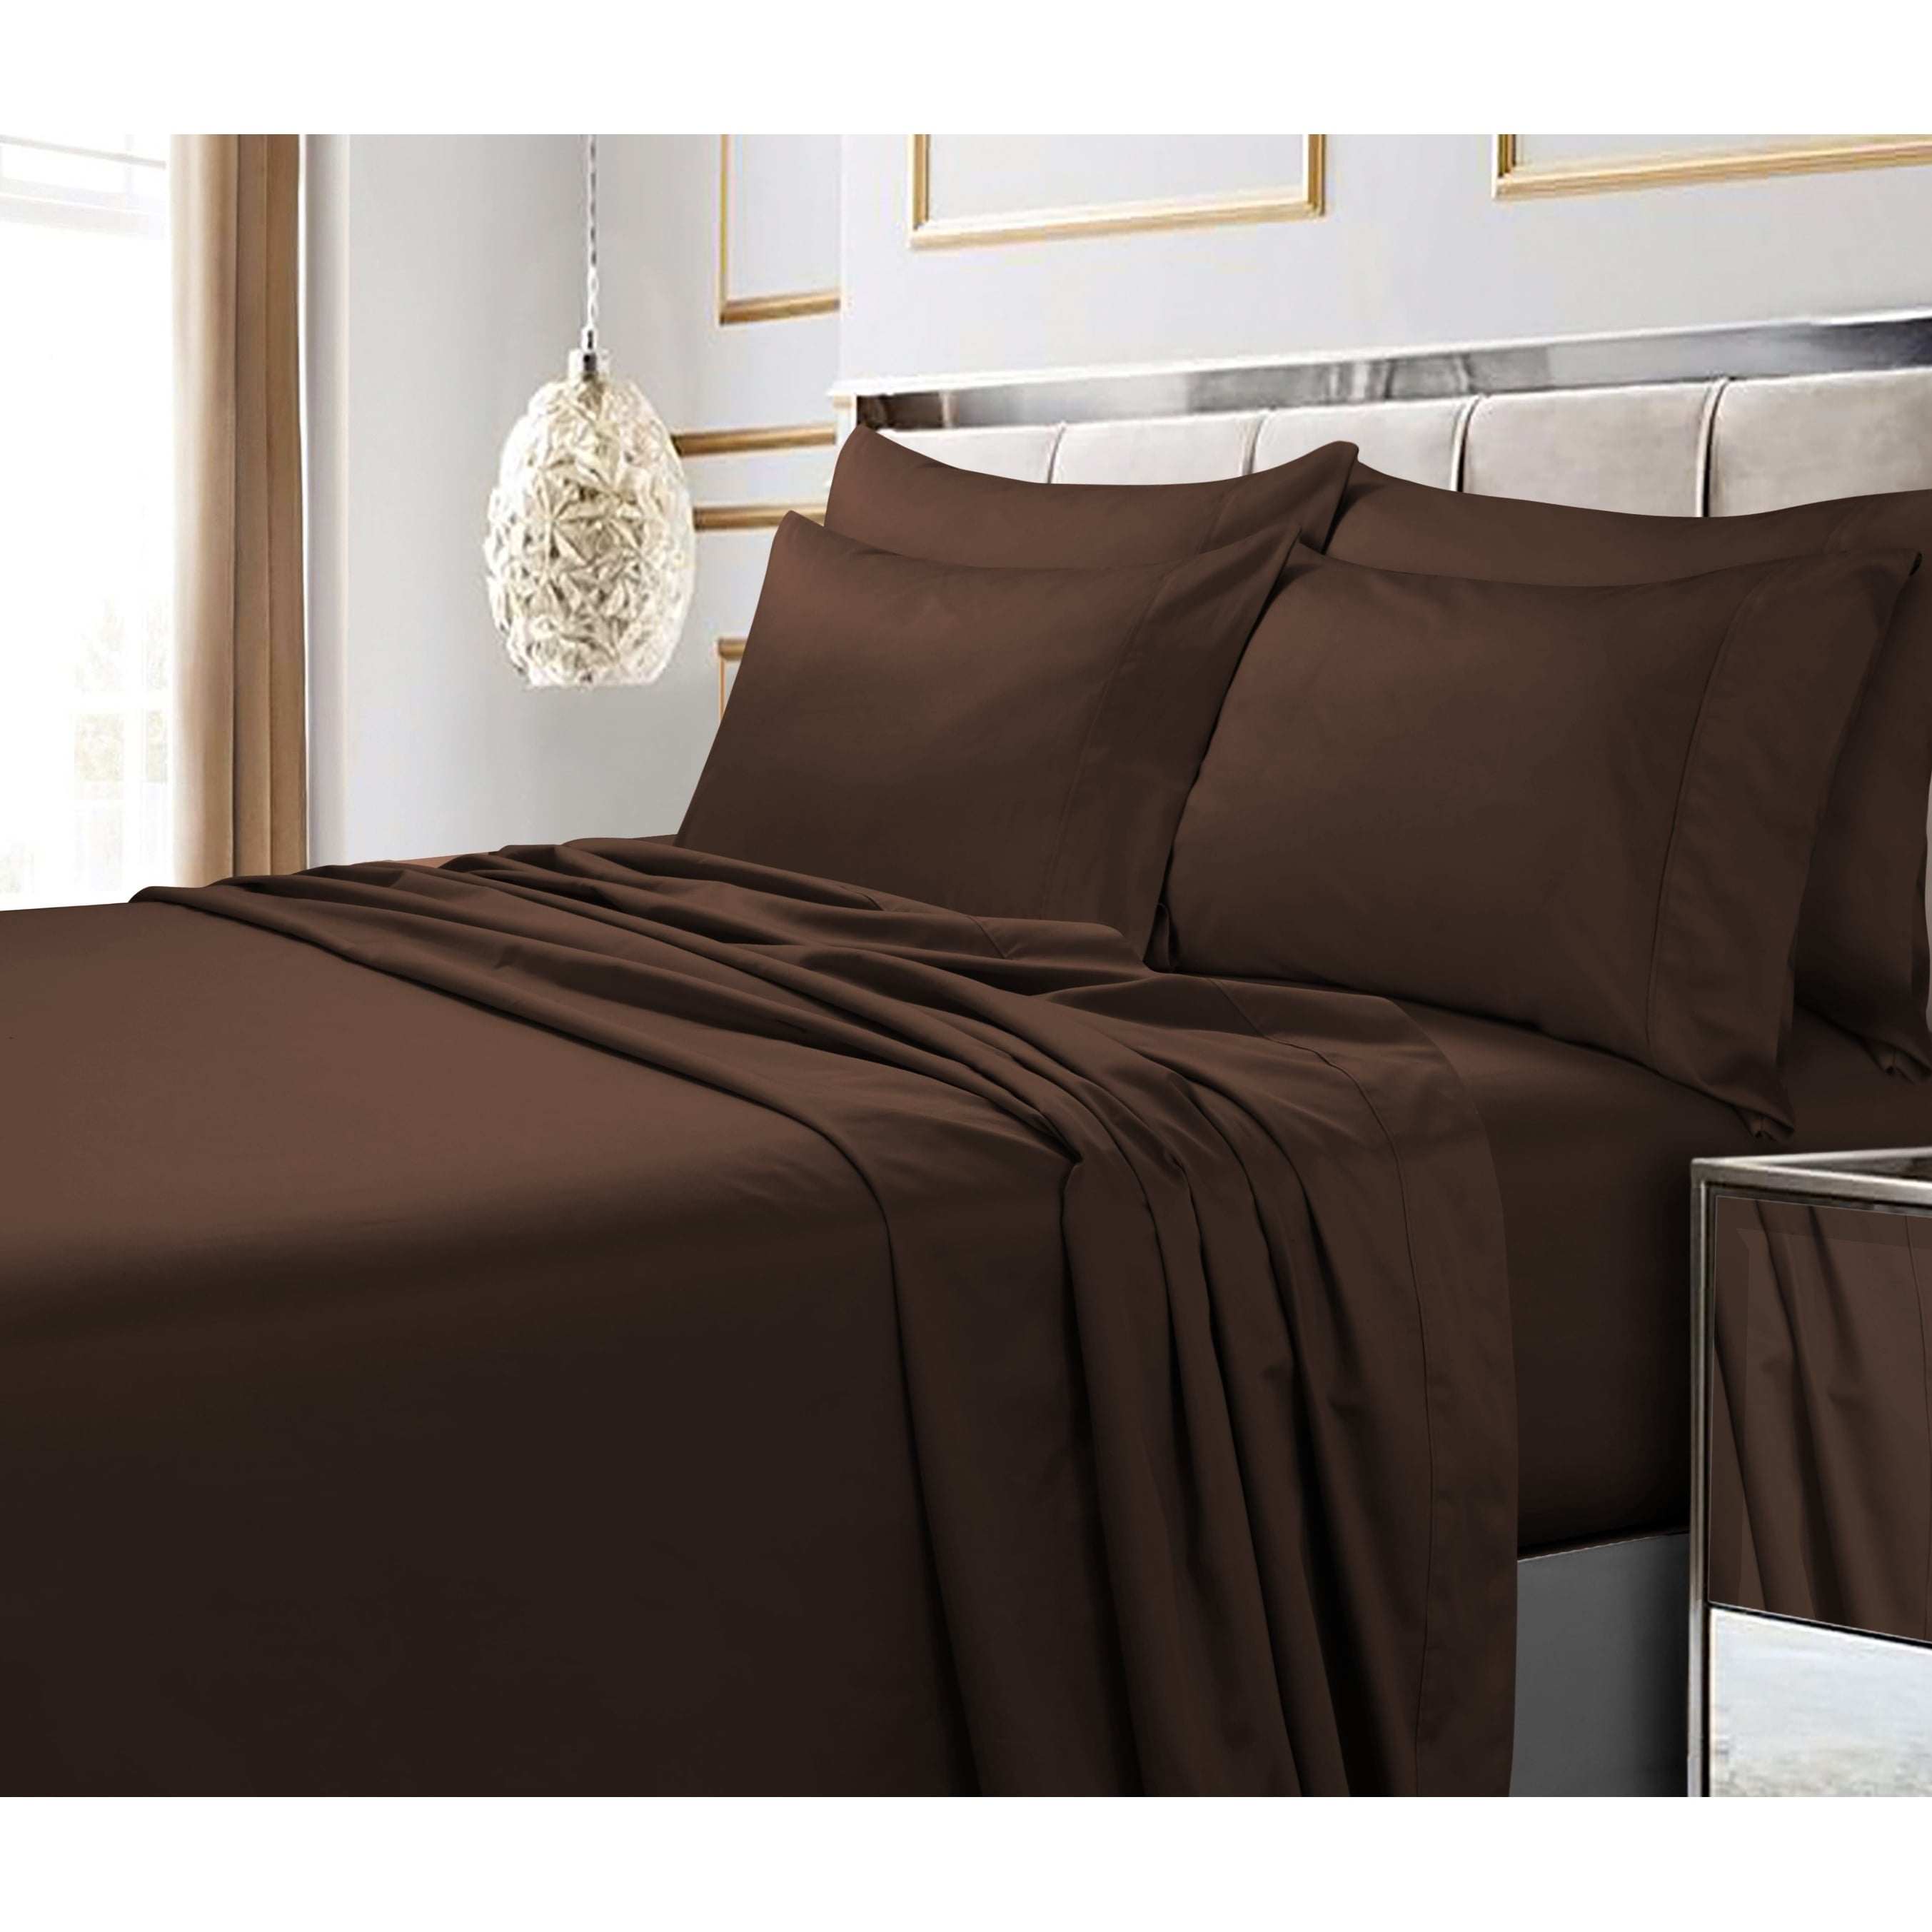 14" Deep Details about   1000 Thread count My-Pillows Bed Sheets Set 100% Egyptian Cotton 9"